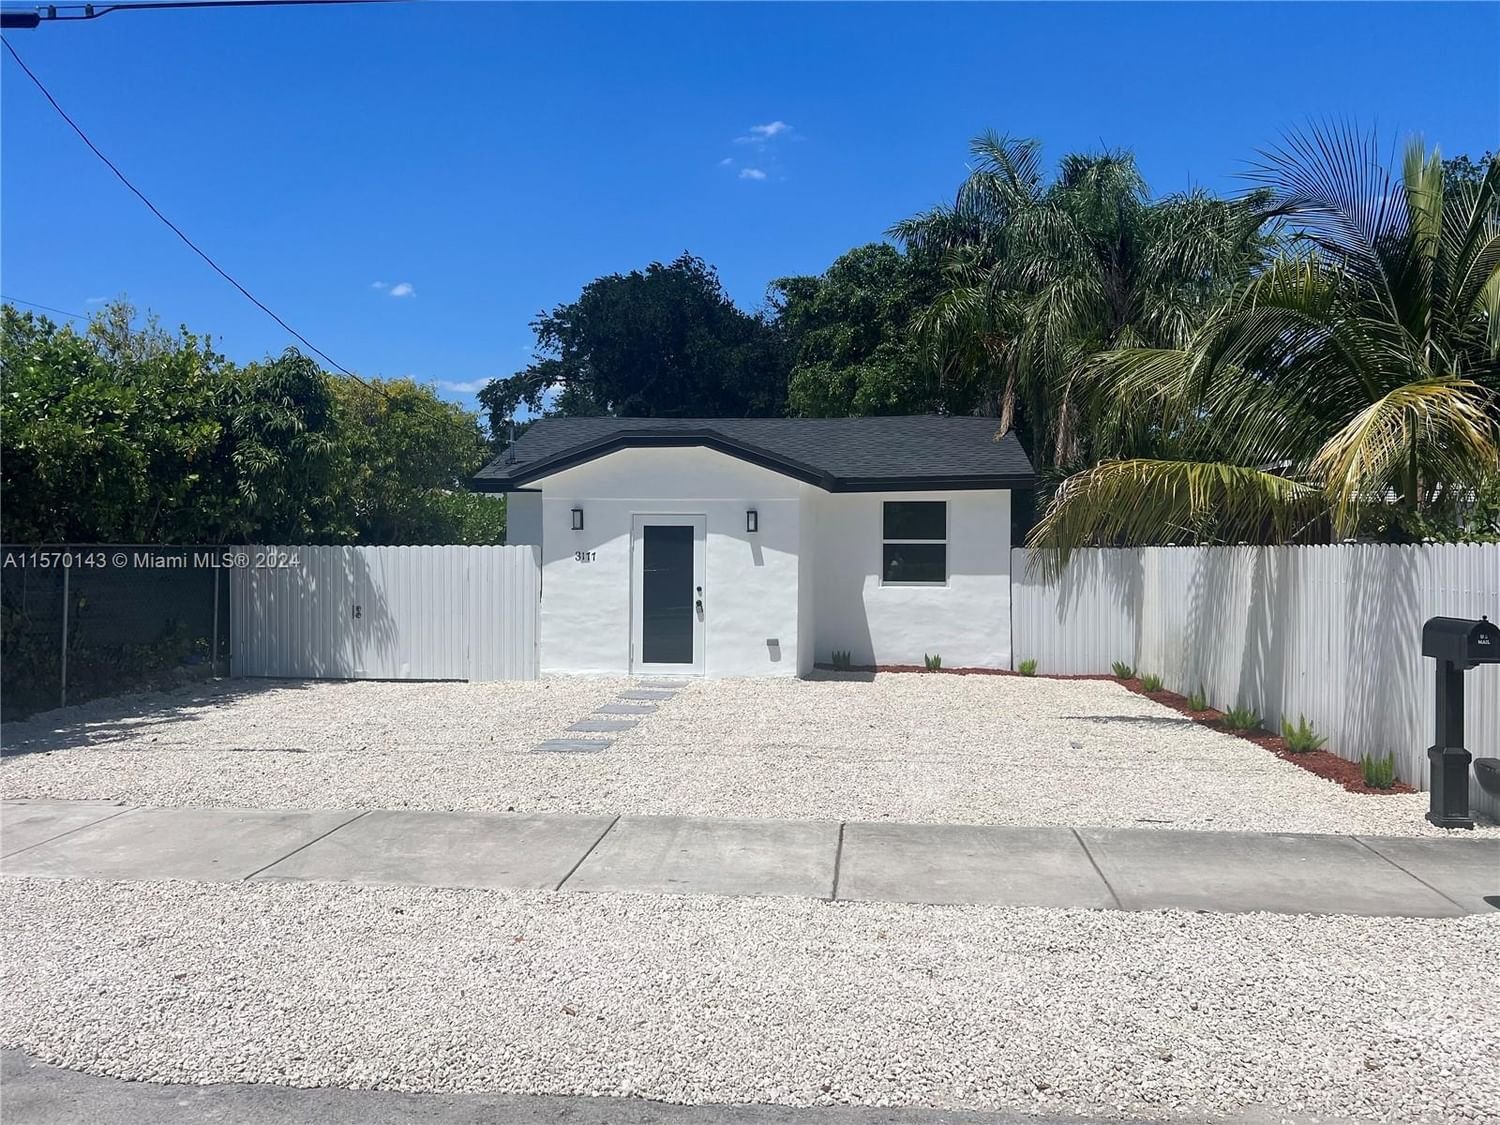 Real estate property located at 3177 42nd St, Miami-Dade County, LAURAVILLE GARDENS, Miami, FL